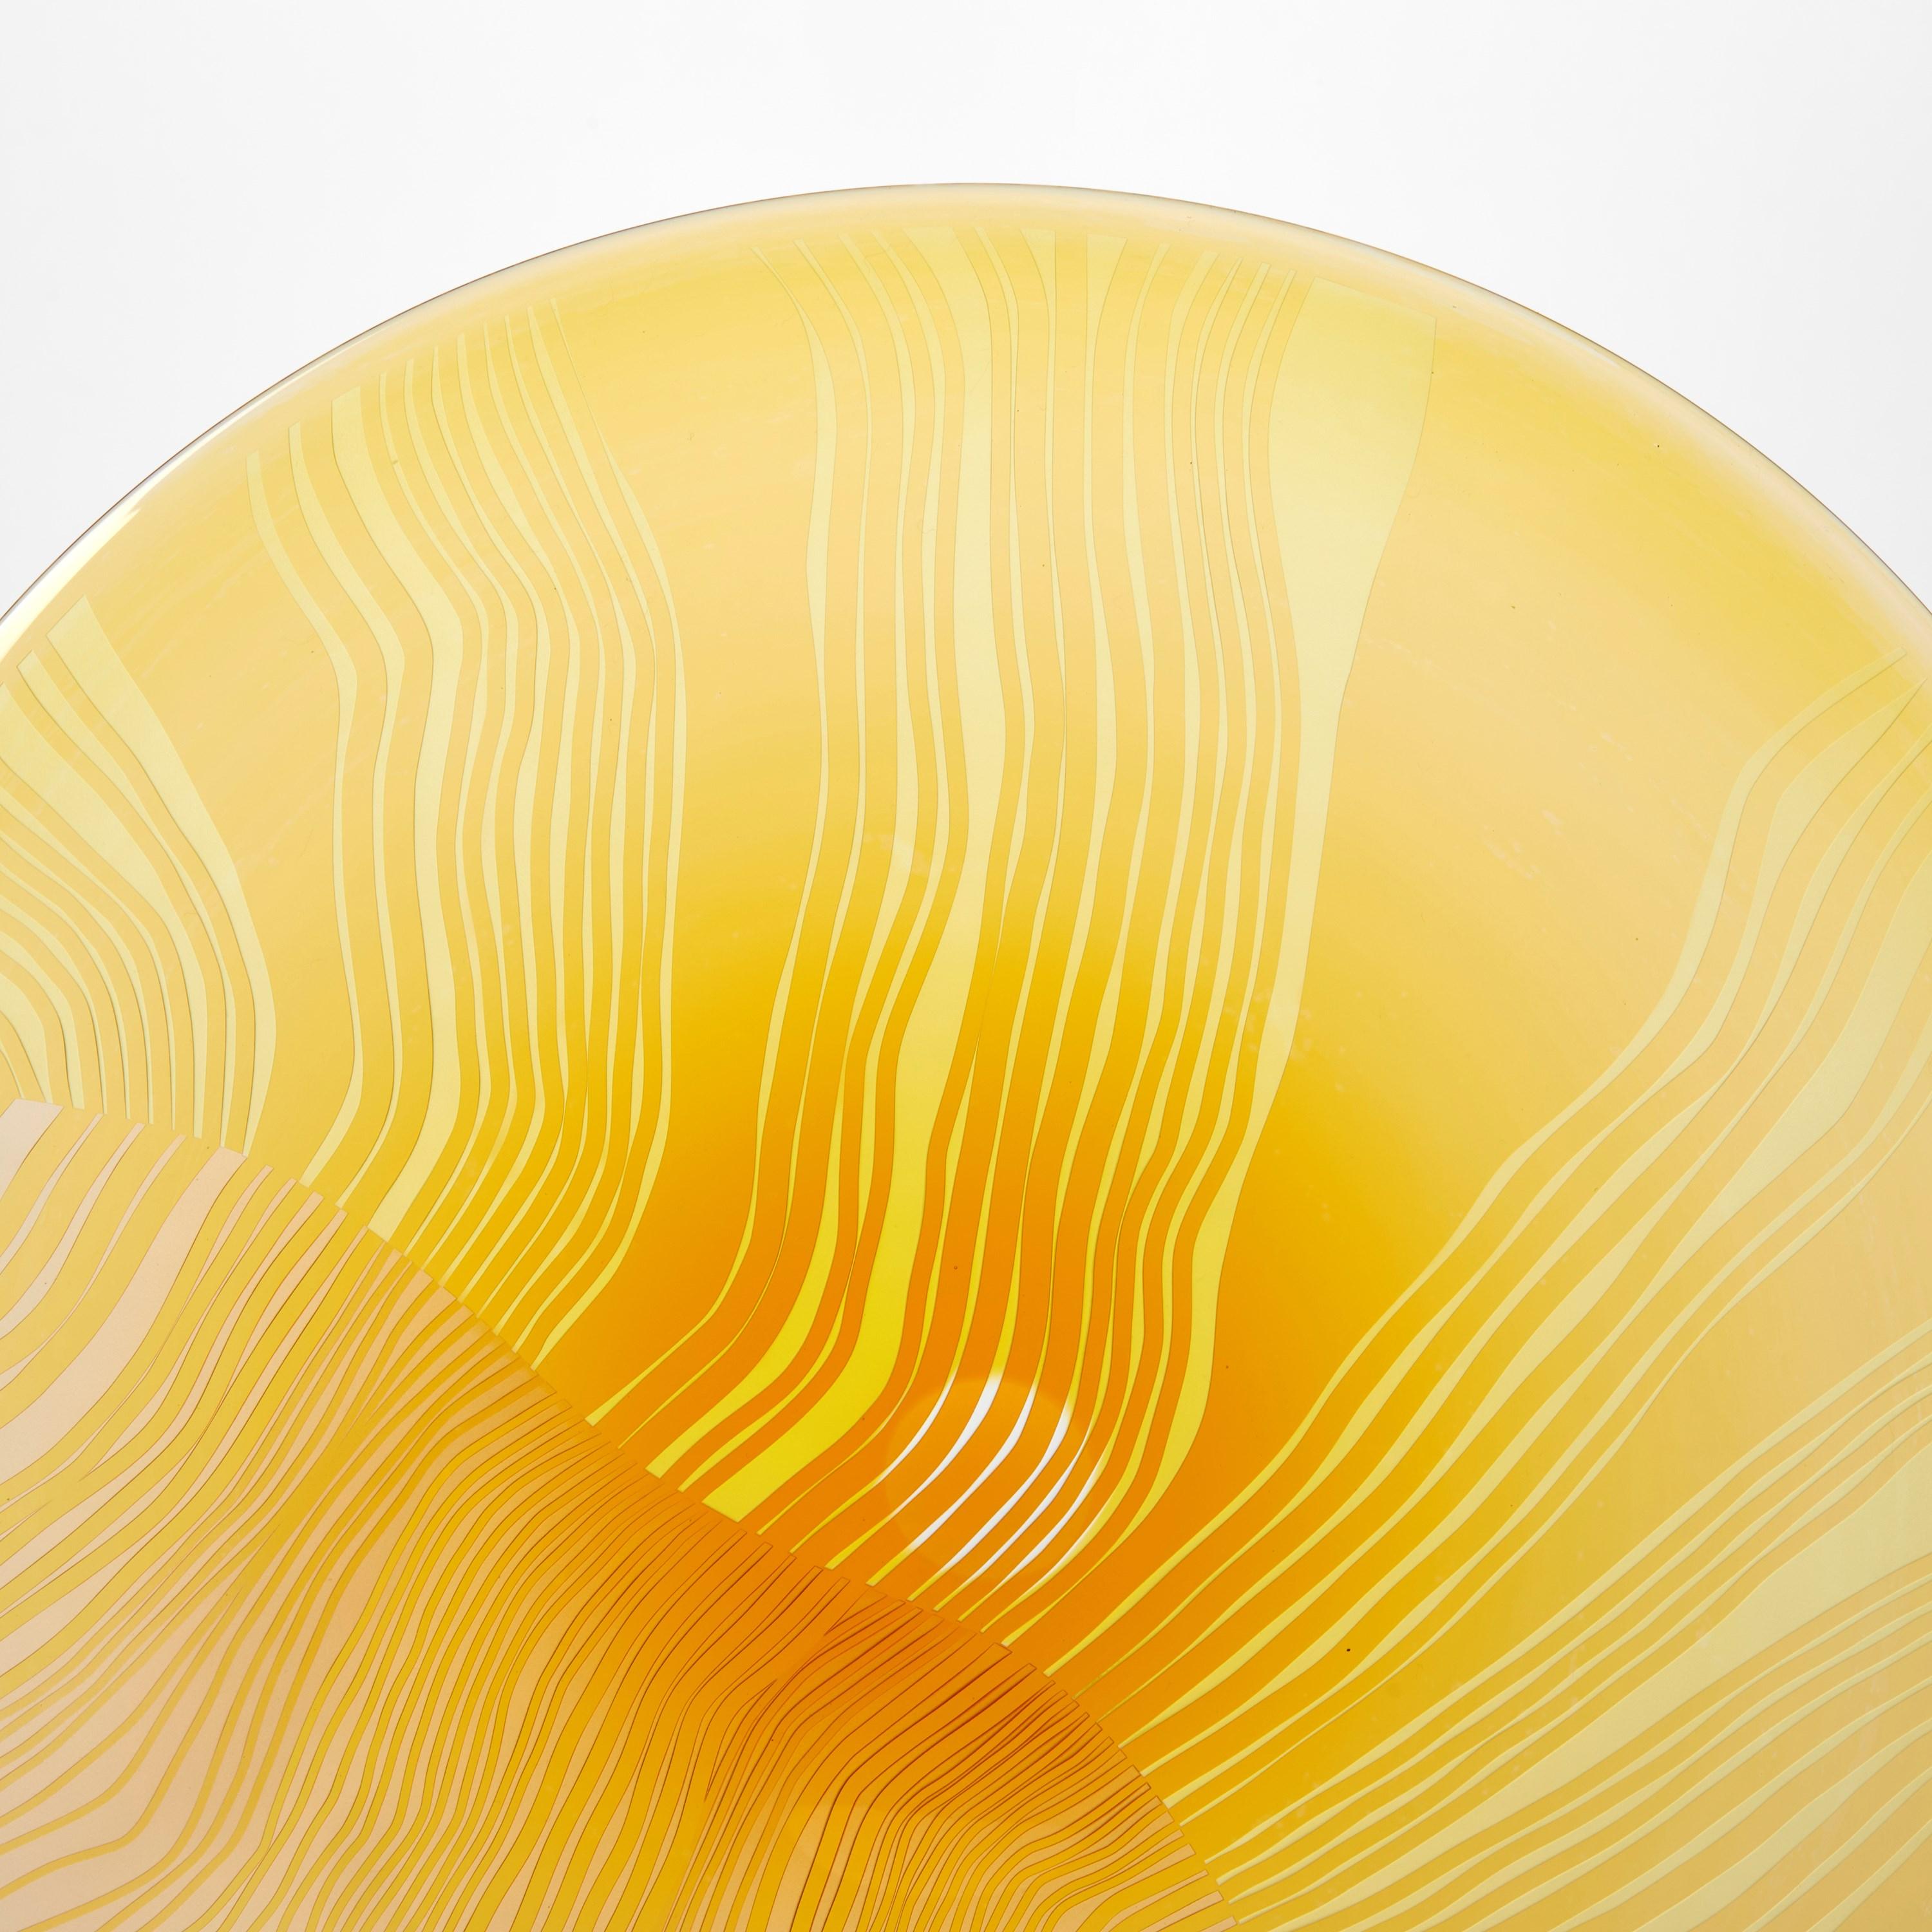 British Solar Storm Gold over Gold, a mounted cut glass rondel artwork by Kate Jones For Sale